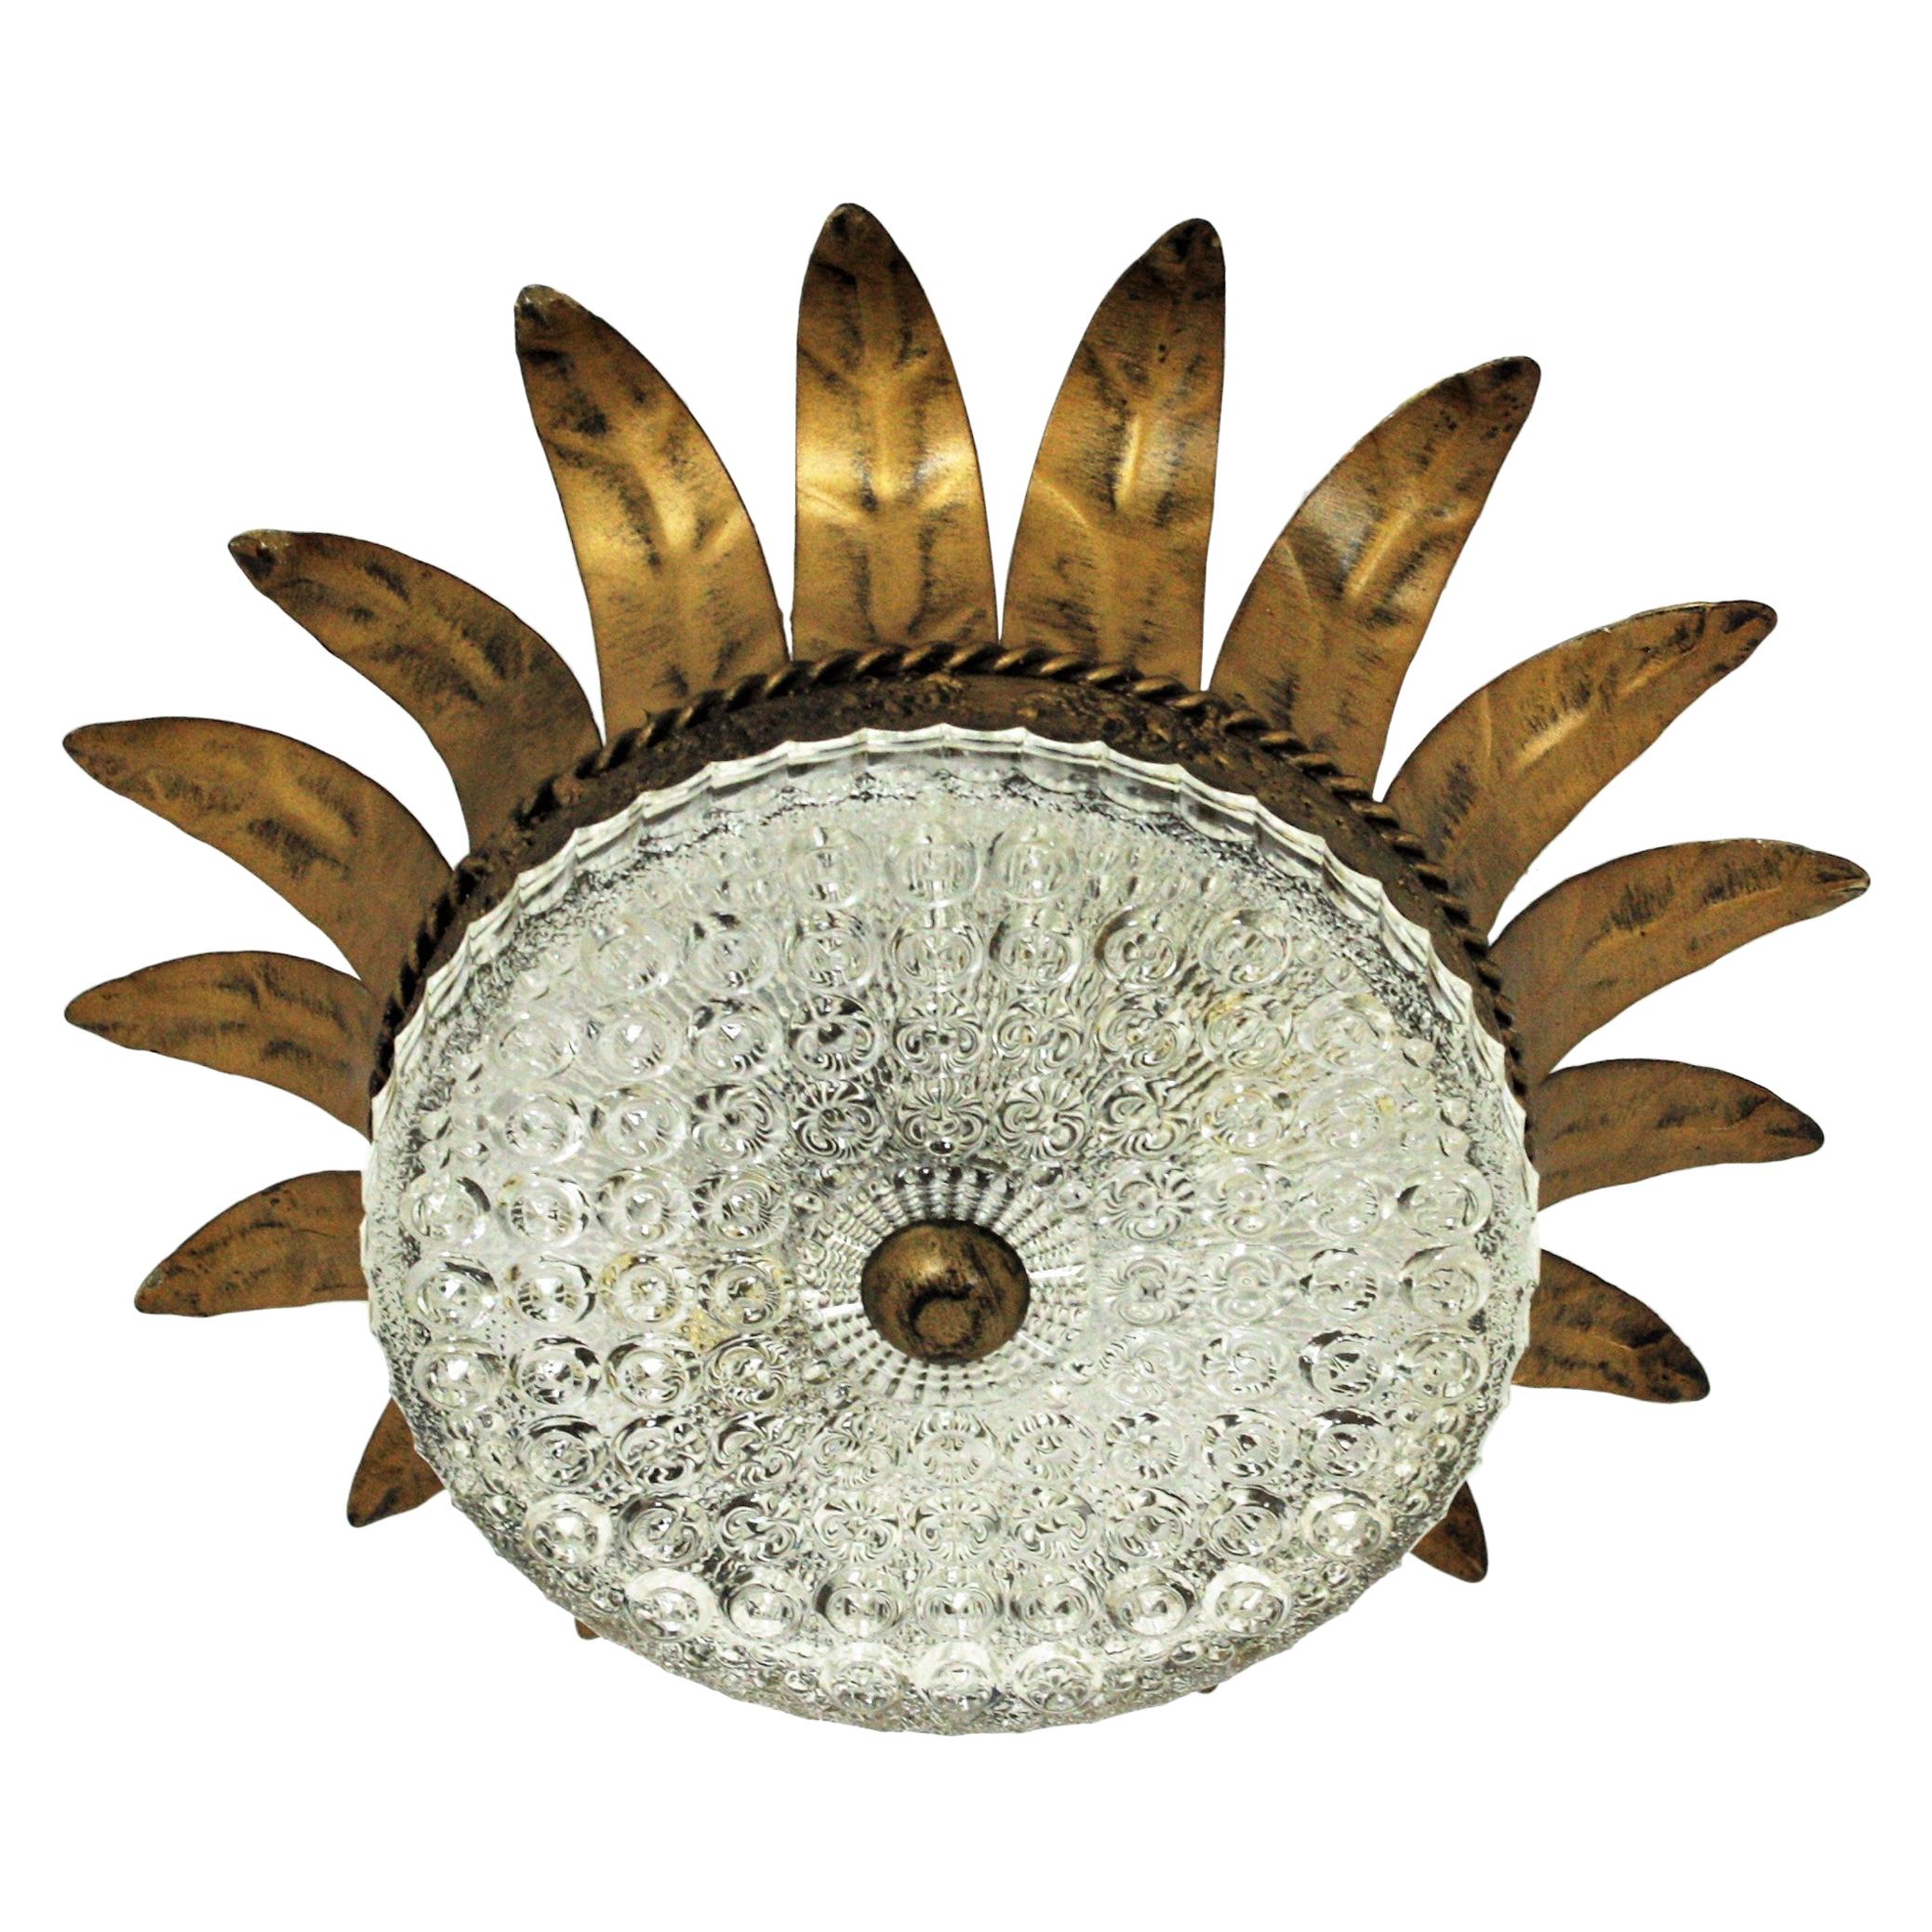 Eye-catching neoclassical style sunburst ceiling light fixture from the Mid-Century Modern period, Spain, 1950s.
This ceiling fixture features a gilt metal sunburst crown shaped structure with a pressed glass shade with a gilt iron finial.
It has